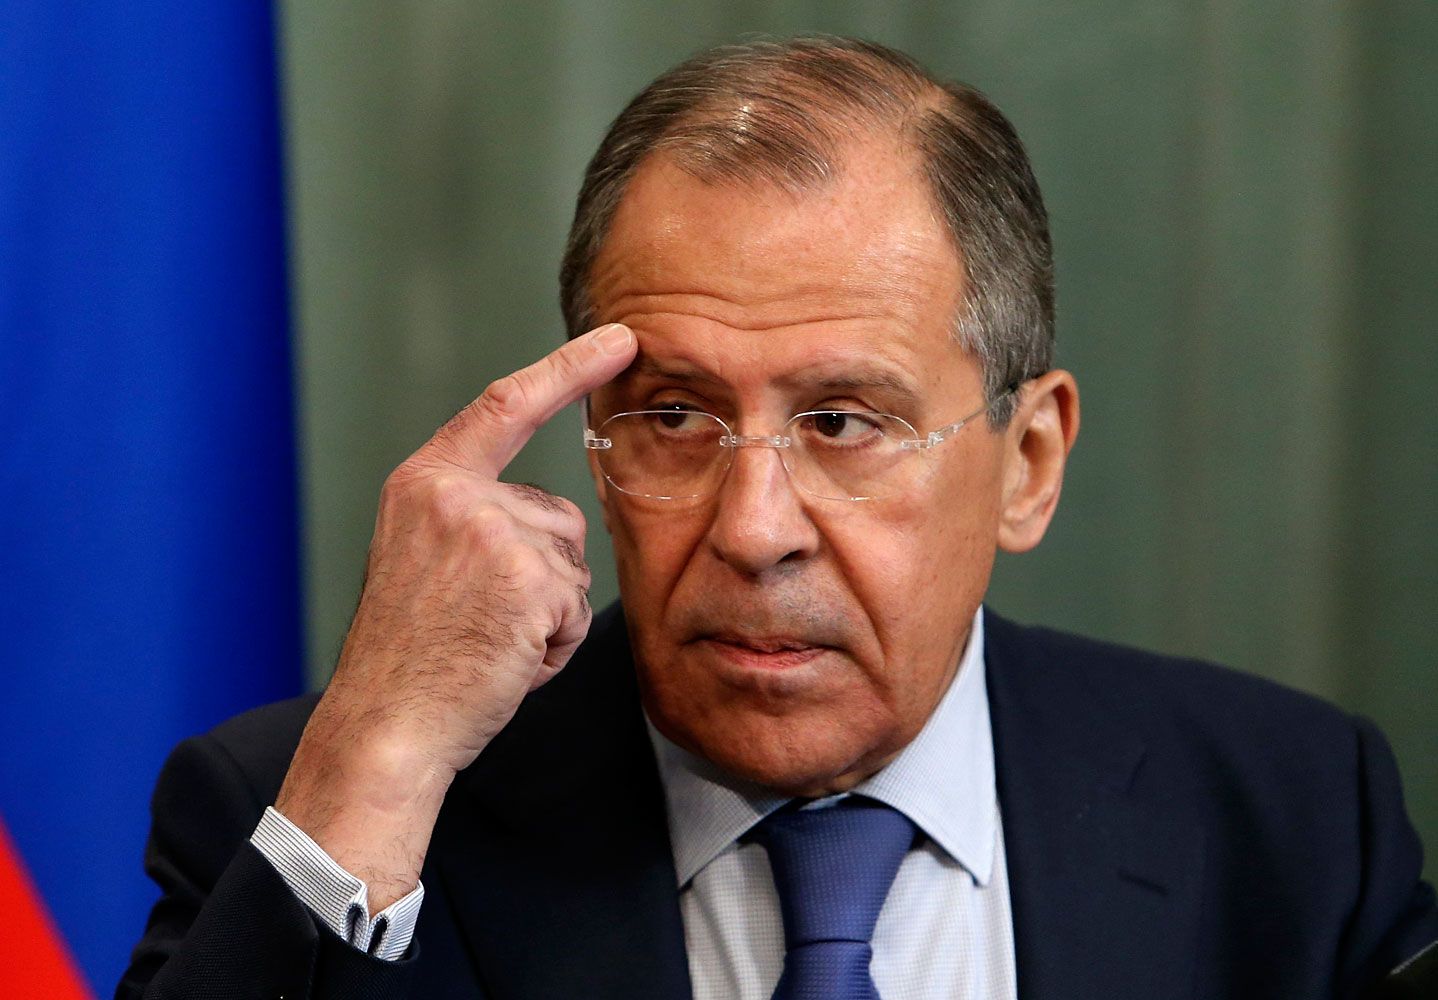 Russia's Foreign Minister Sergei Lavrov gestures during a news conference, after a meeting with his counterpart from Mozambique Oldemiro Baloi, in Moscow April 21, 2014. (Sergei Karpukhin—Reuters)